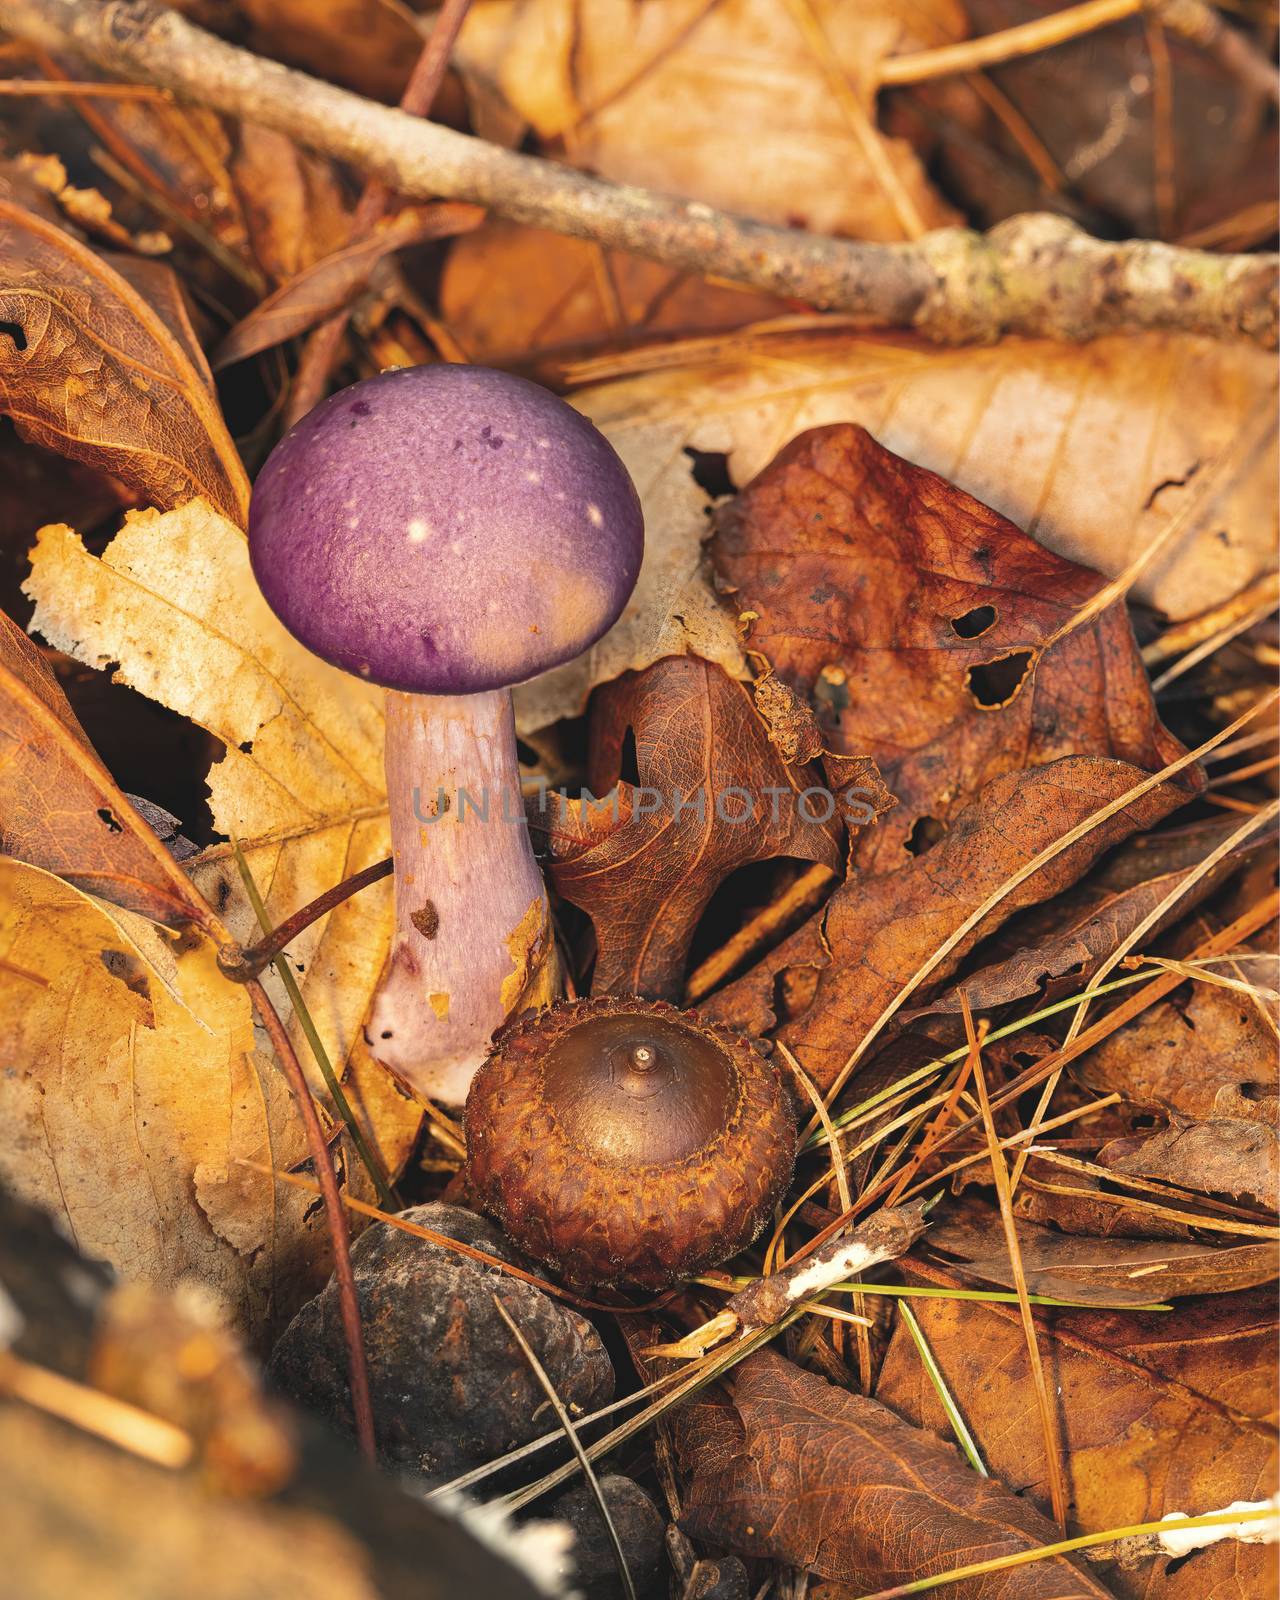 Small Purple Mushroom With Acorn and Leaves by CharlieFloyd